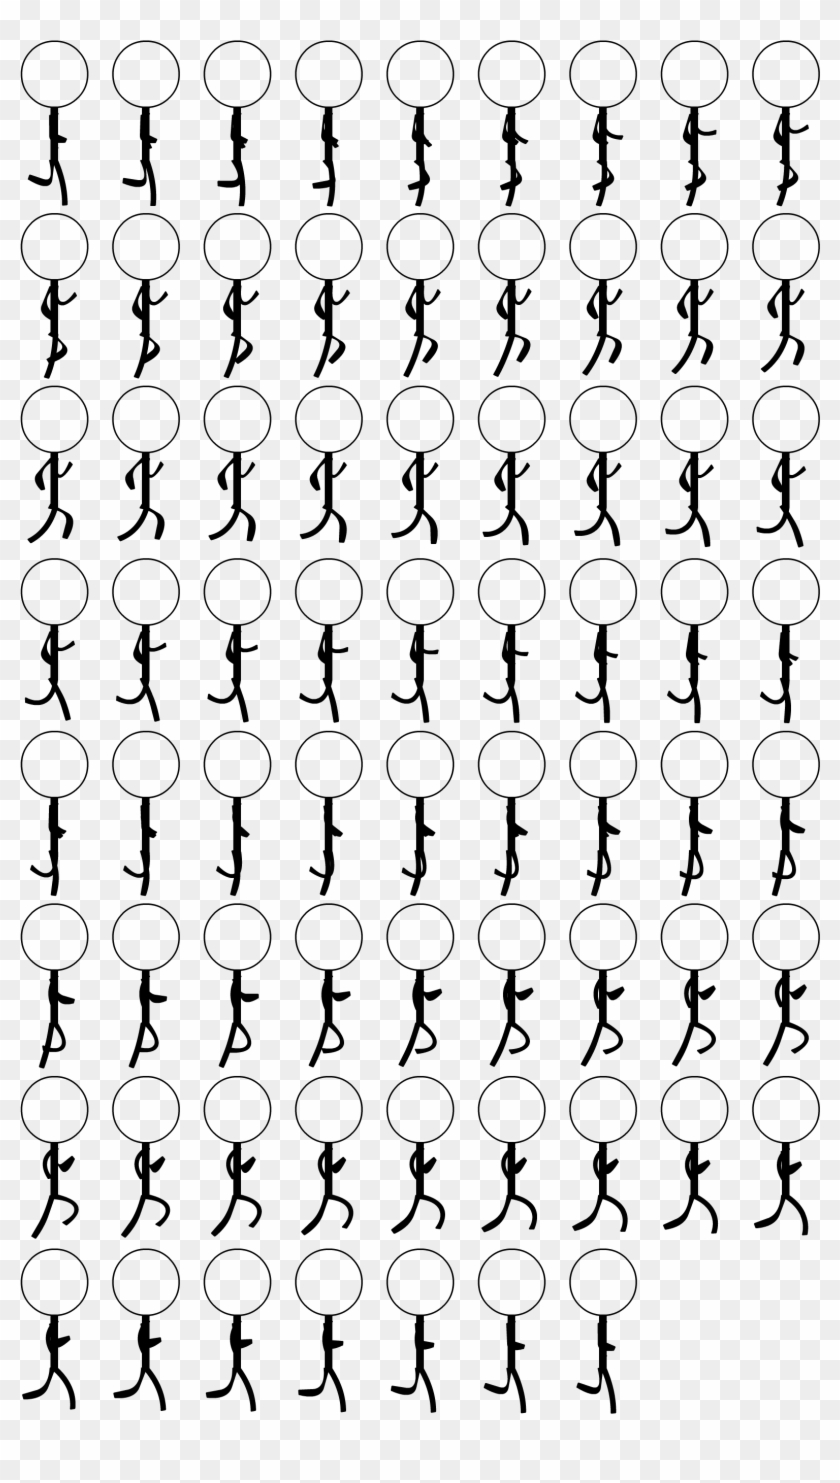 Stickman Character Sprites 159, Game Assets